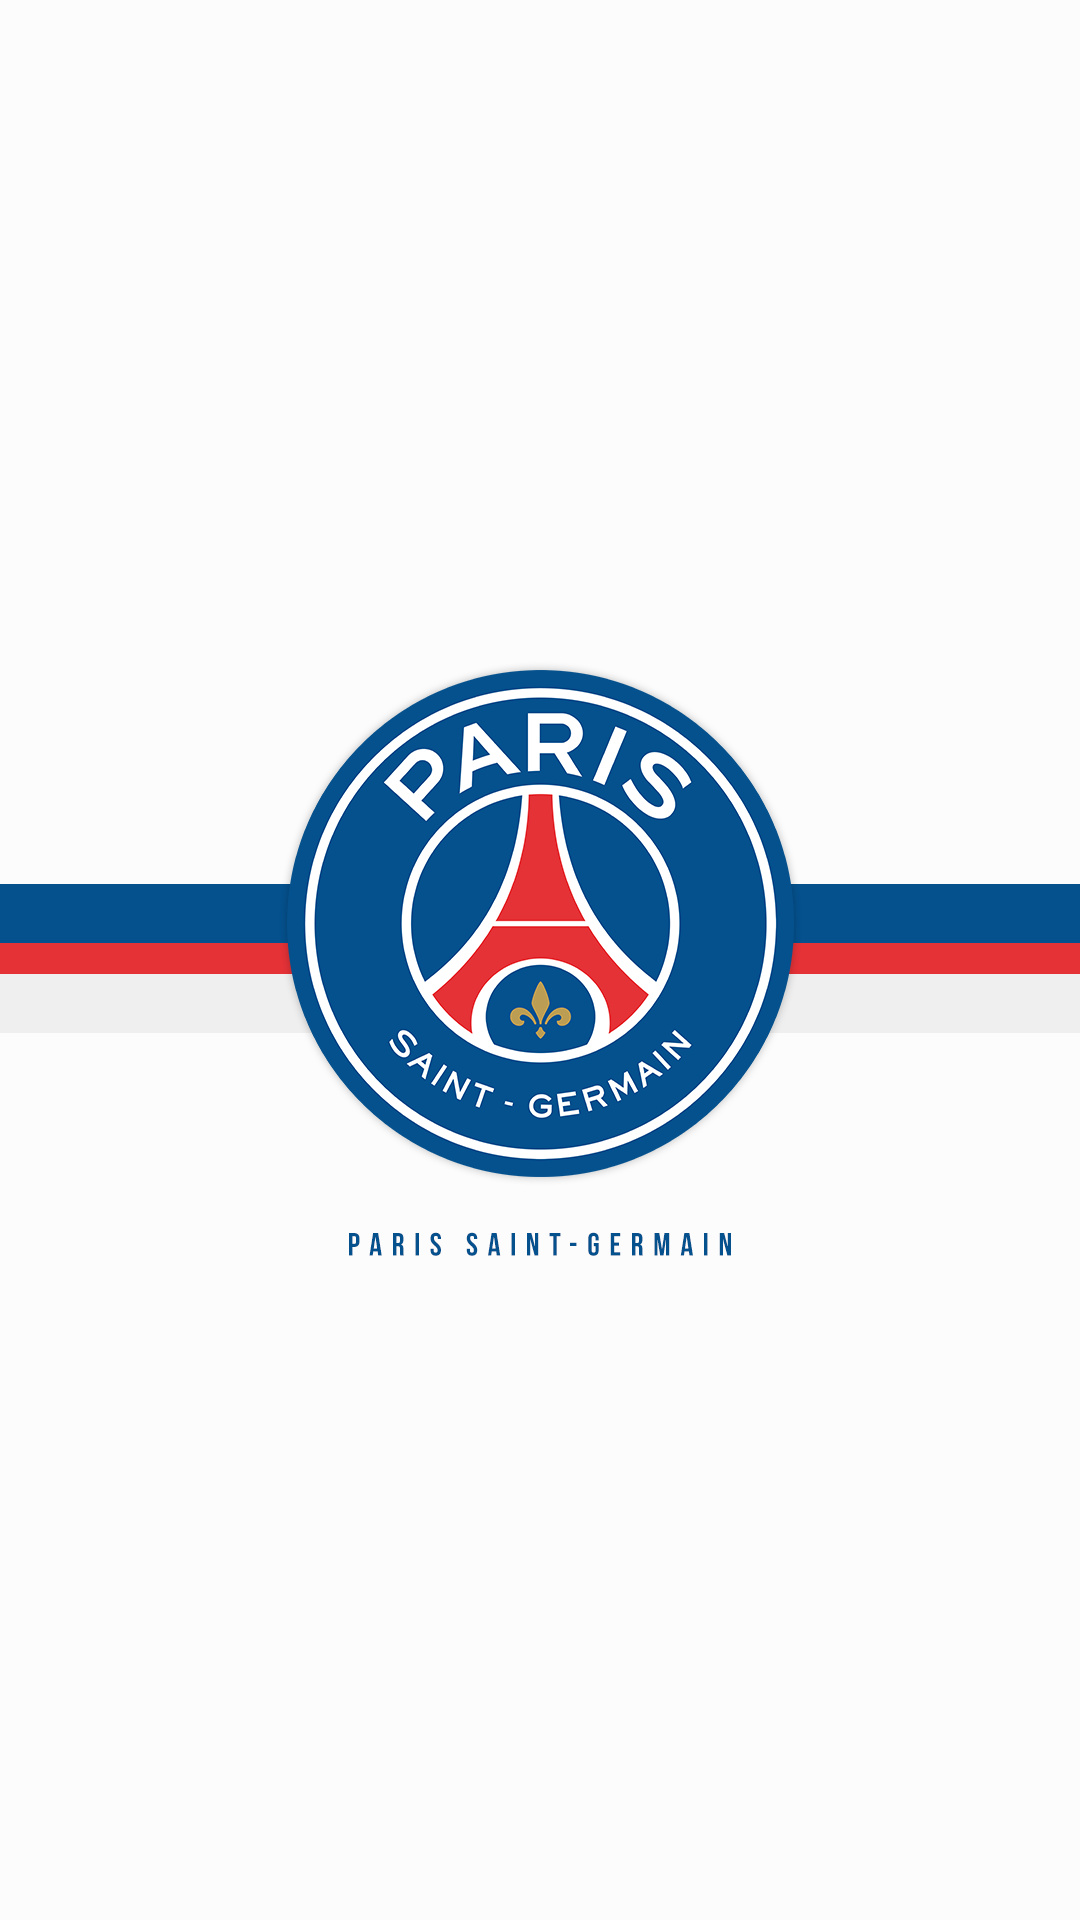 Paris Saint-Germain: The club plays for first division football in France Ligue 1, Coupe de France, Coupe de la Ligue, and UEFA Champions League. 1080x1920 Full HD Background.